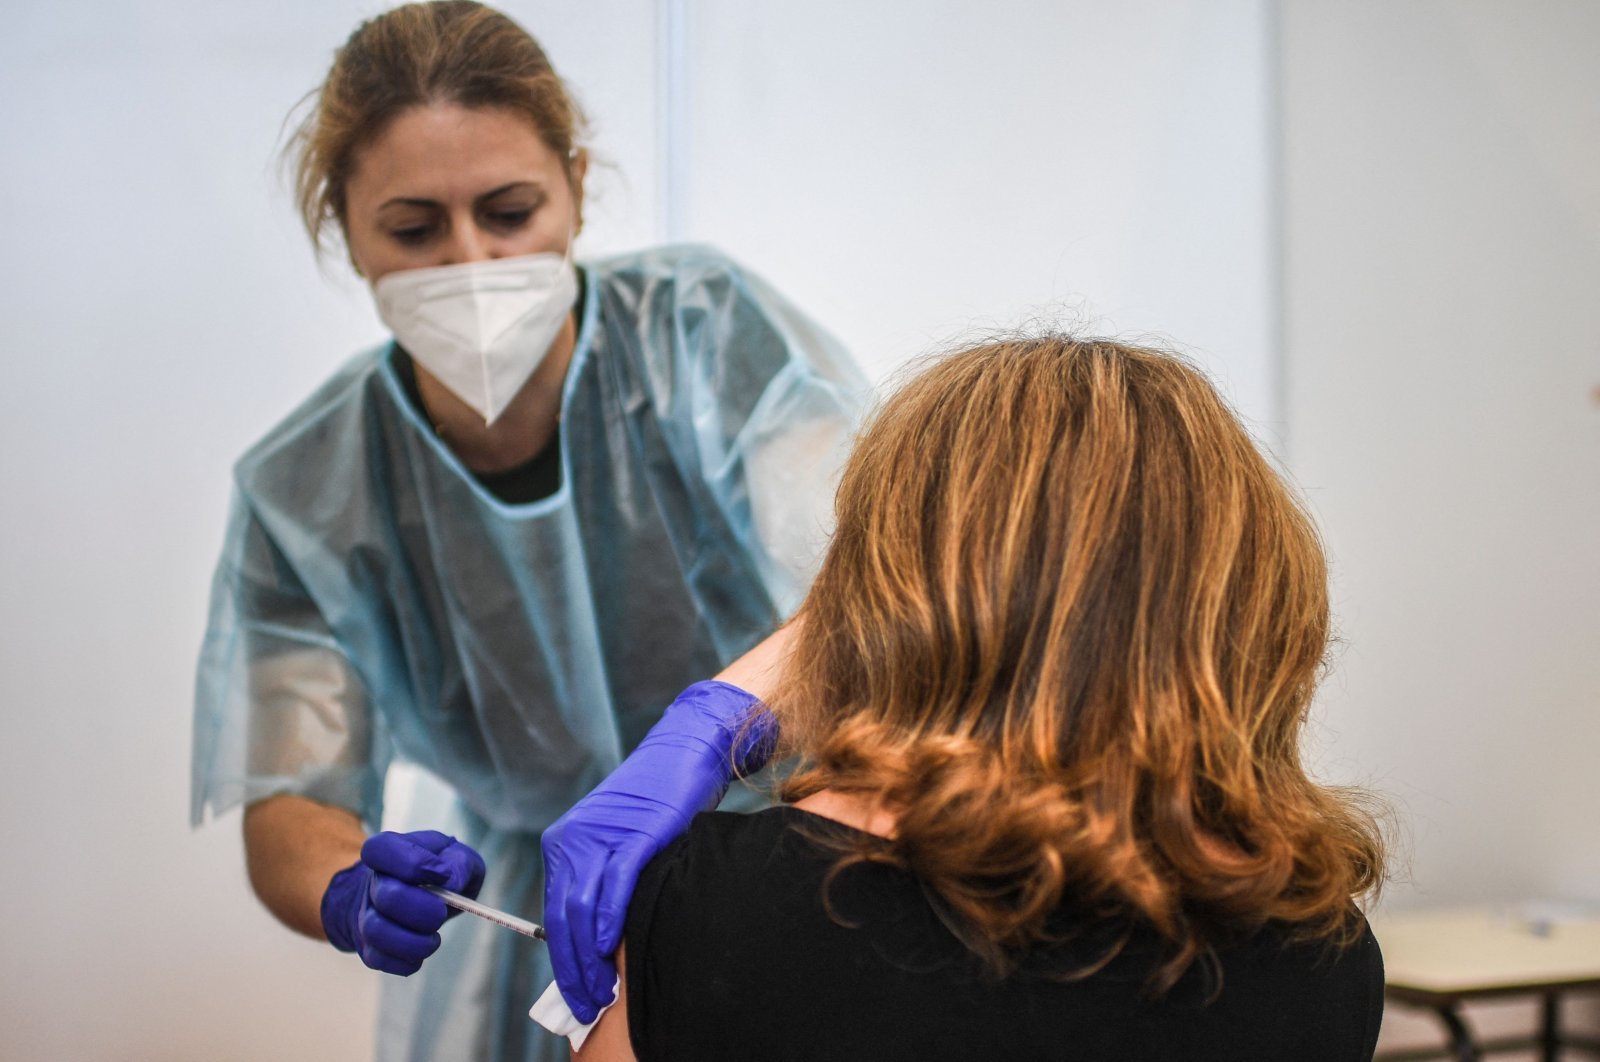 A healthcare worker administers a dose of a COVID-19 vaccine to a woman at a vaccination center in Lisbon, Portugal, July 2, 2021. (AFP Photo)